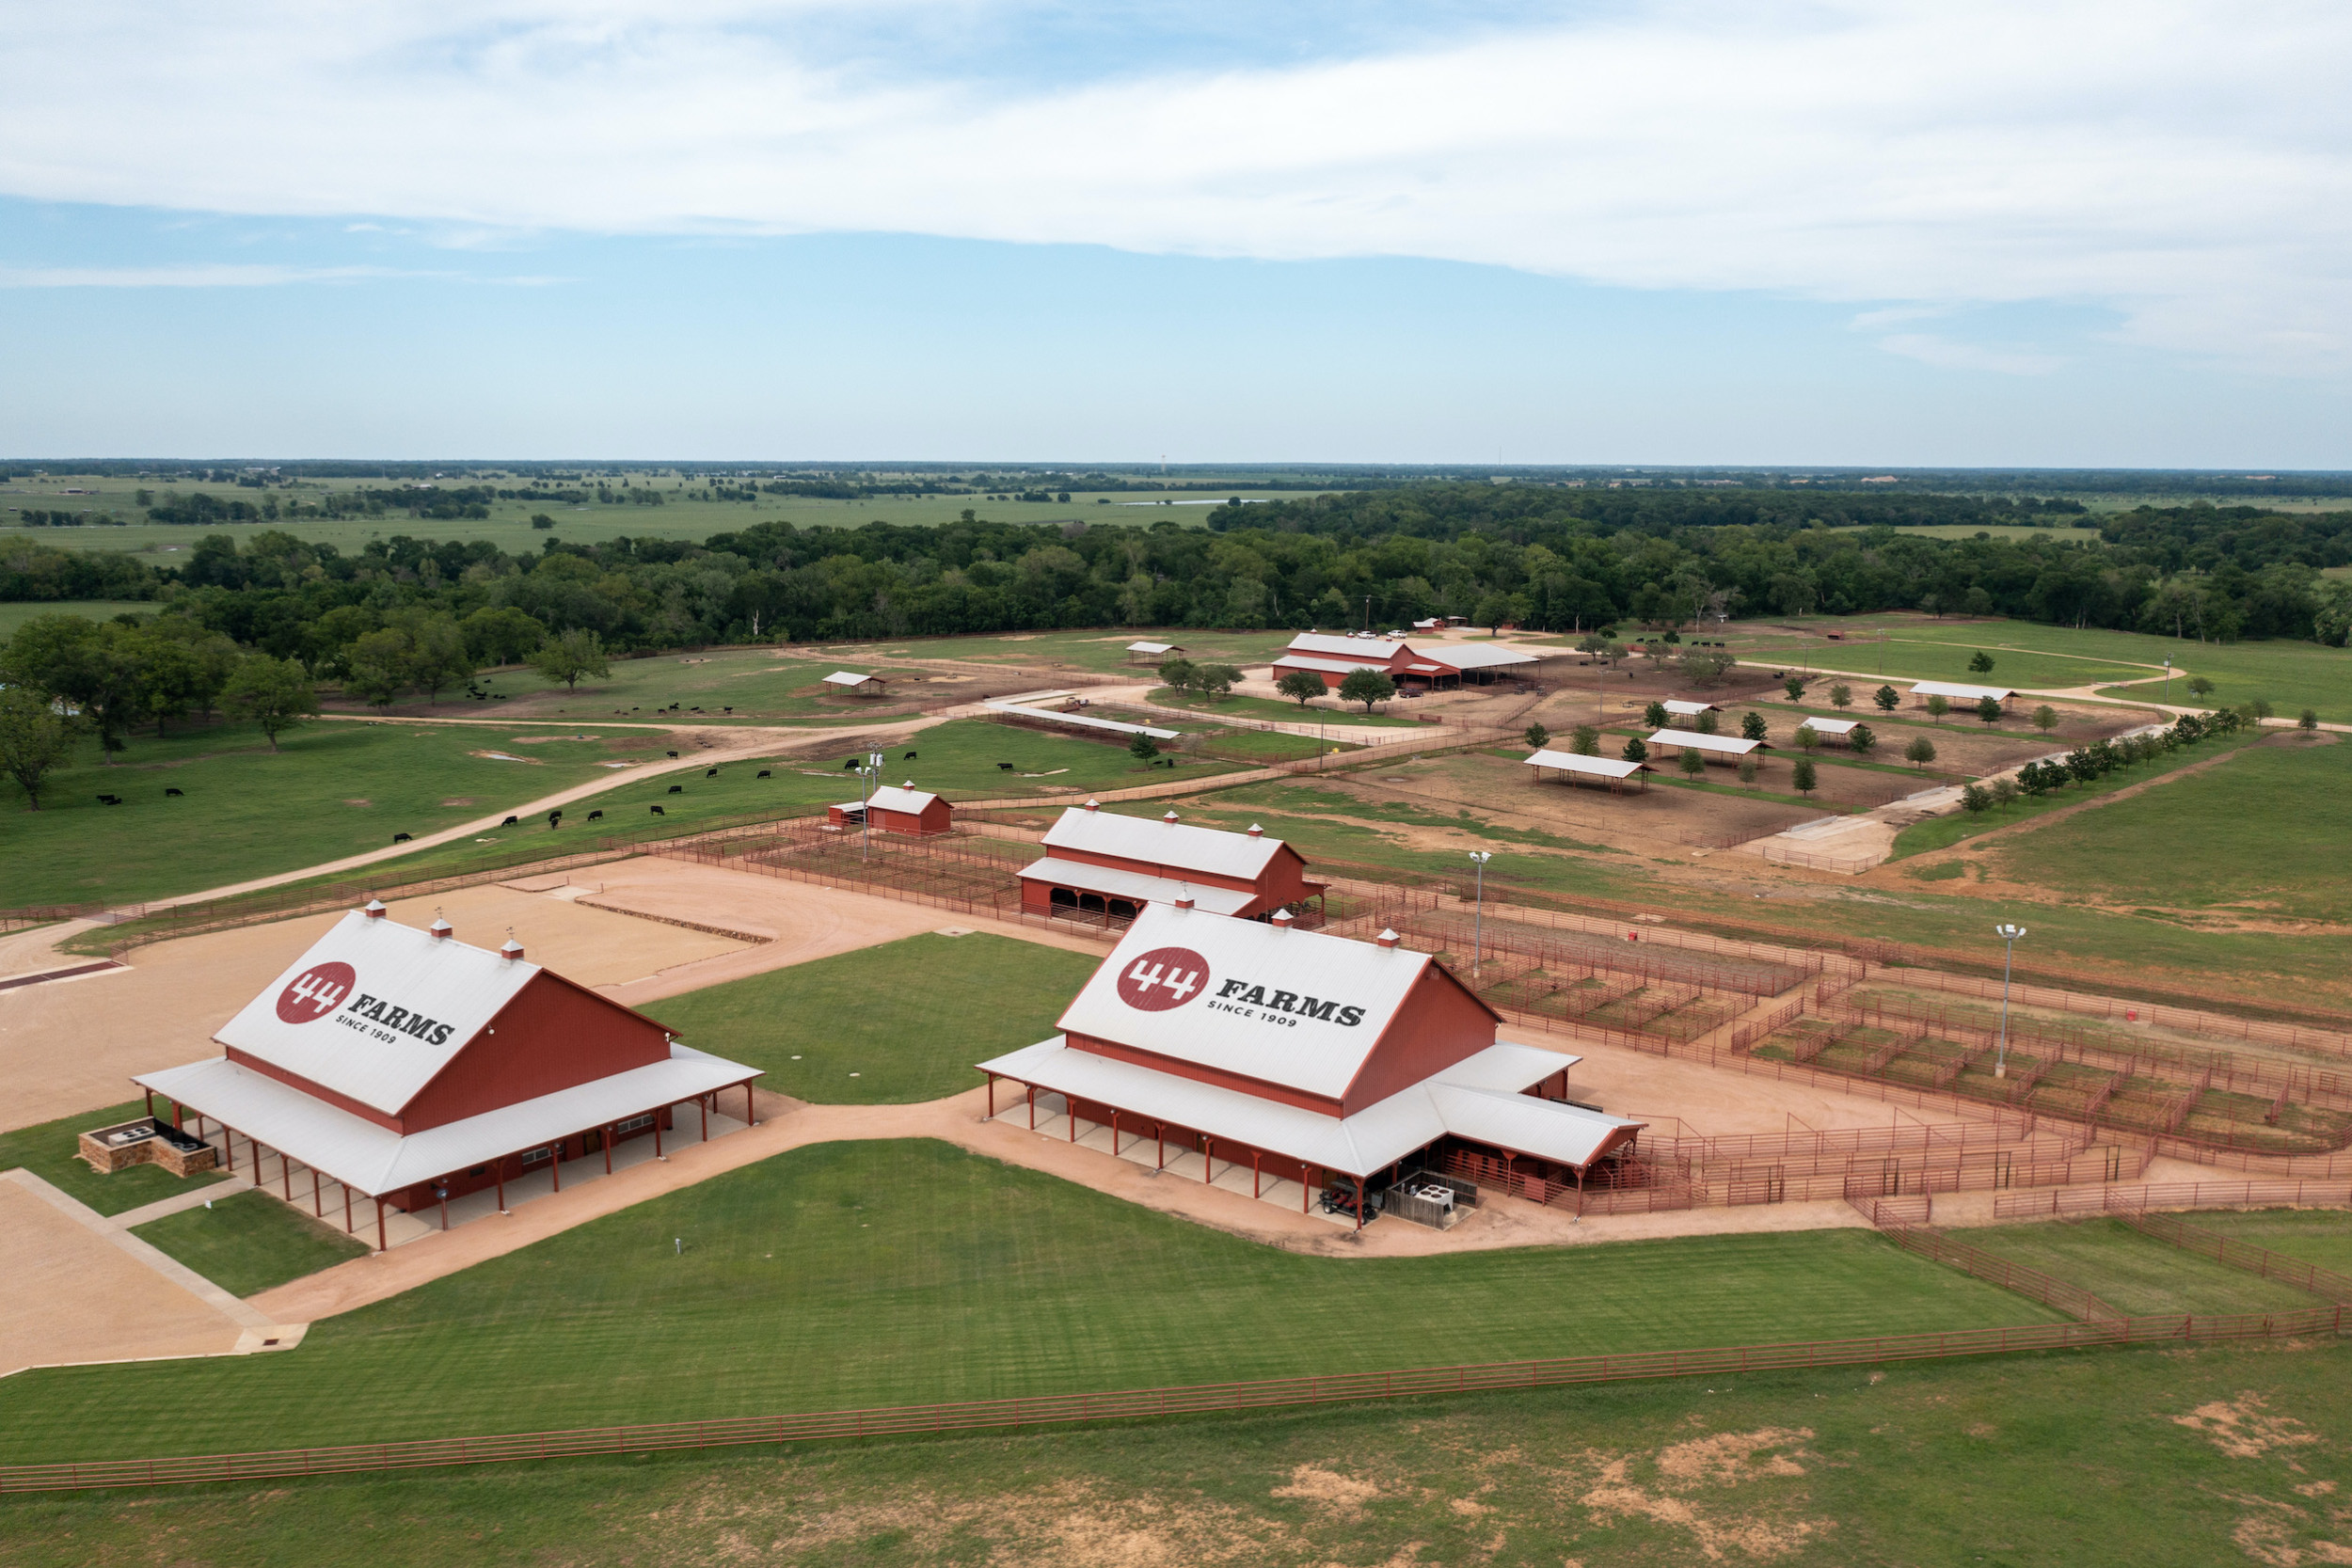 Aerial view of 44 Farms barns